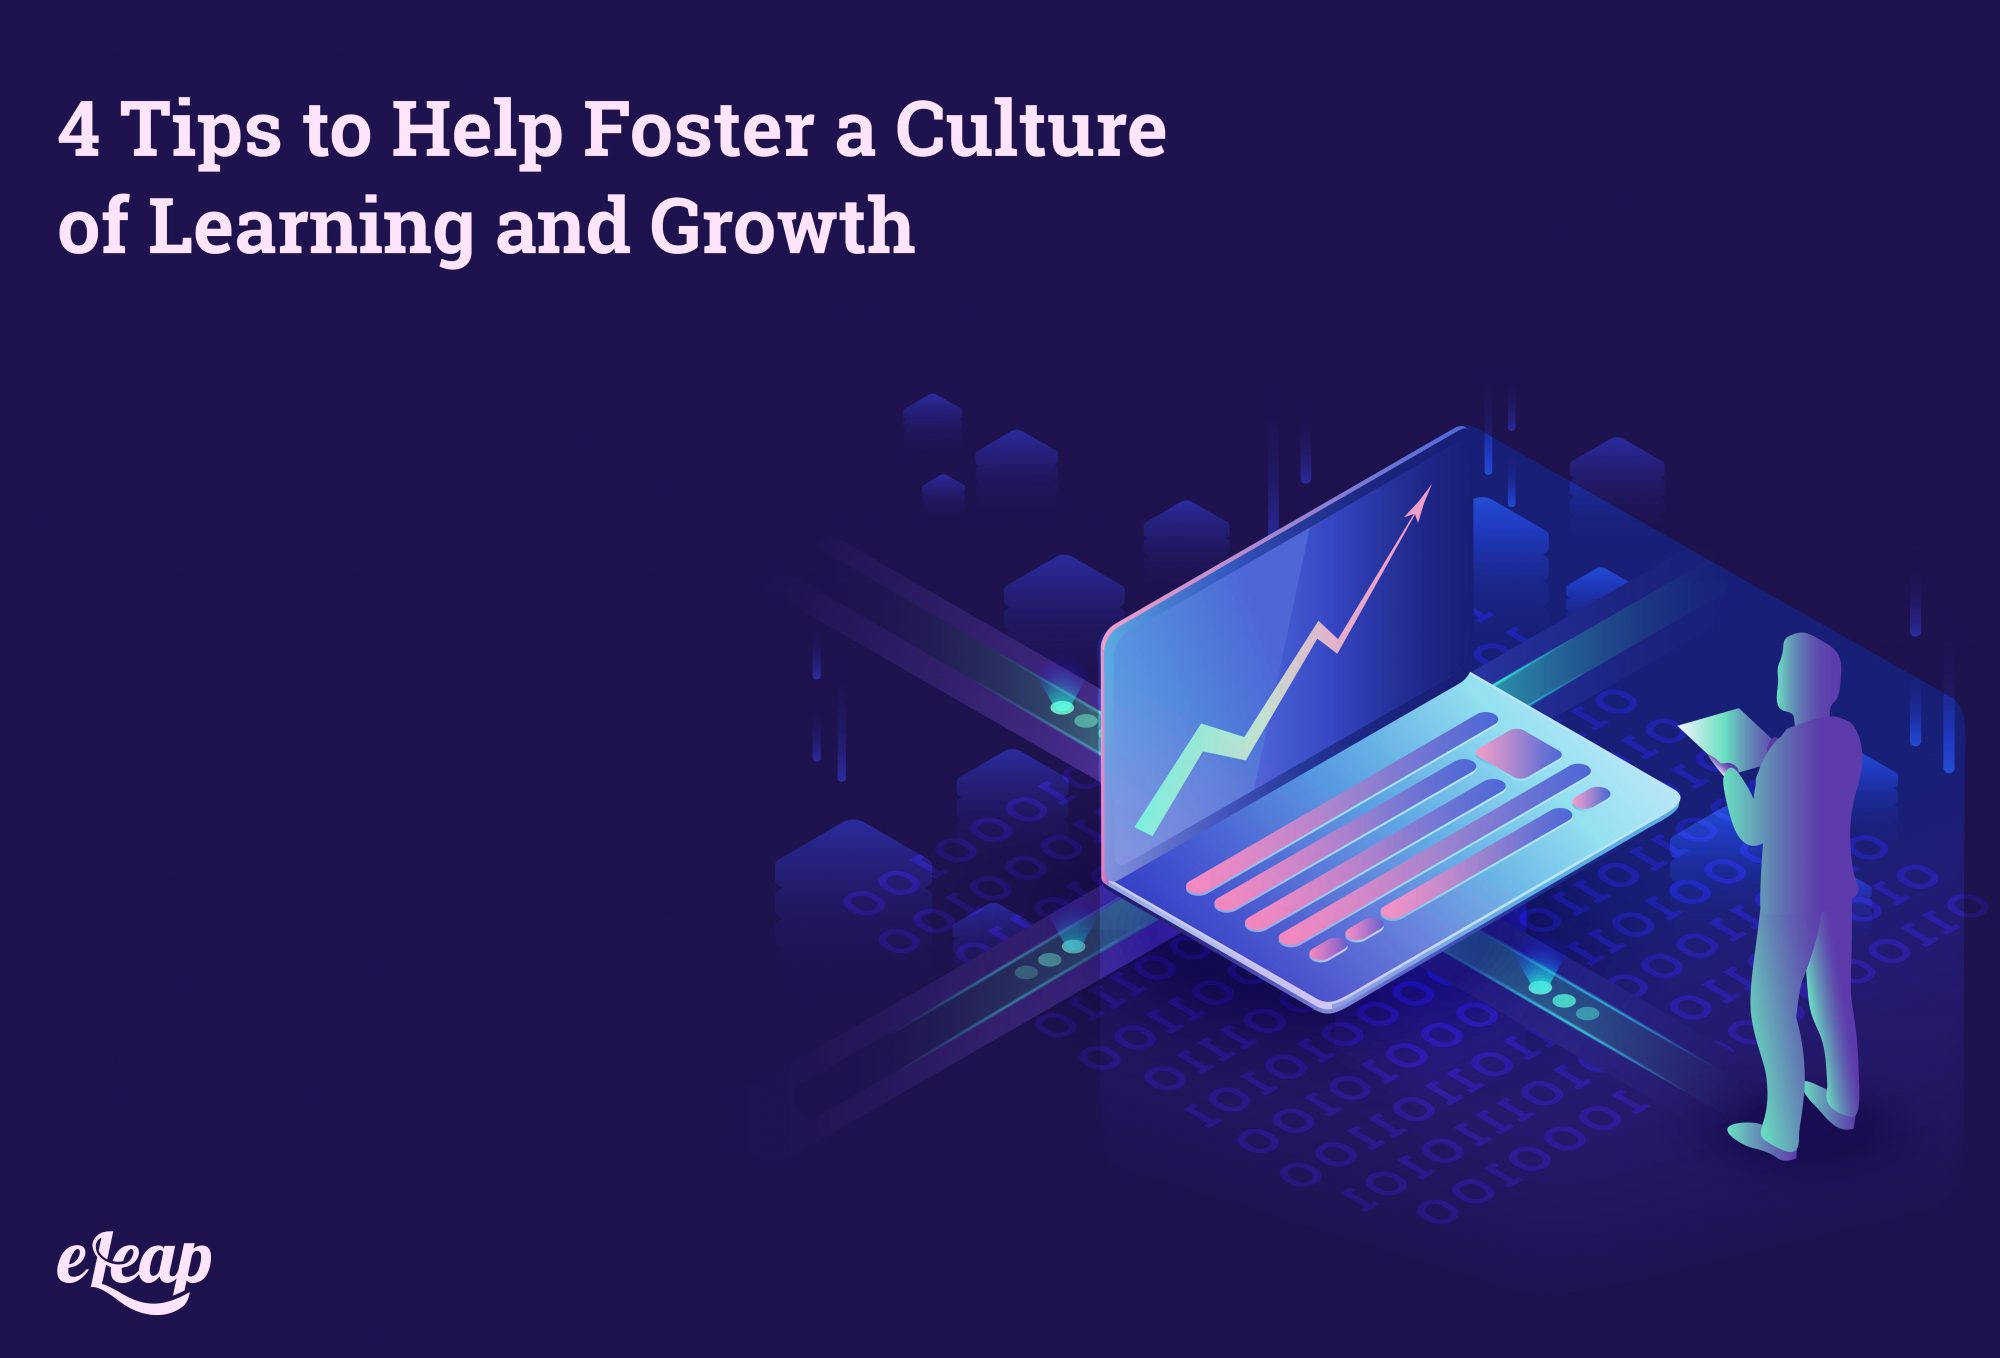 4 Tips to Help Foster a Culture of Learning and Growth